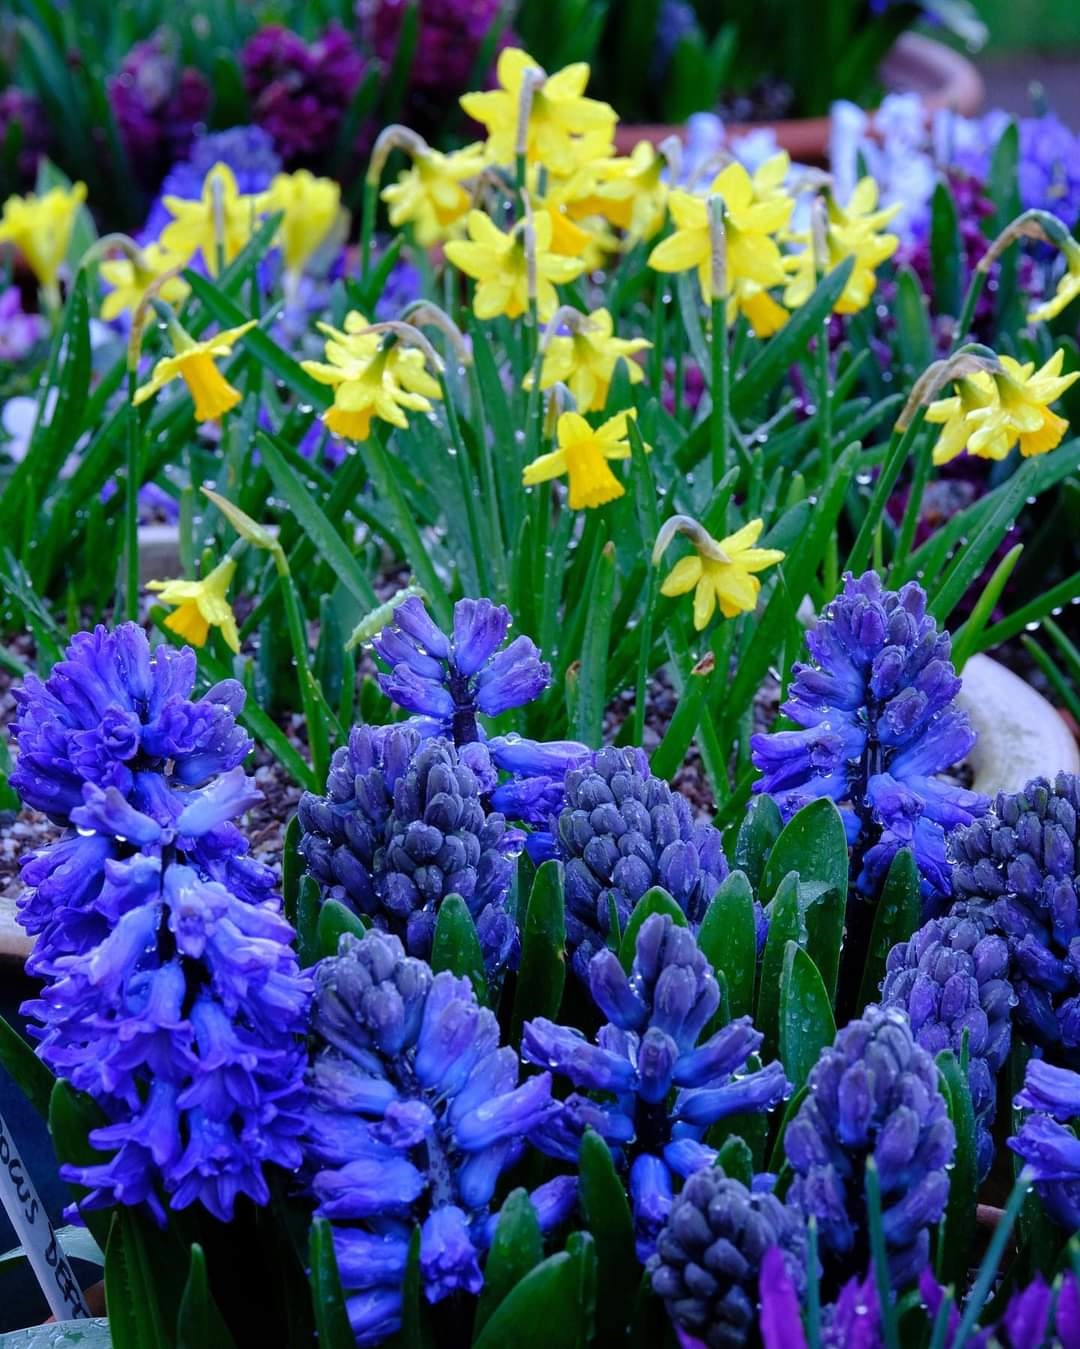 Yellow and blue flowers